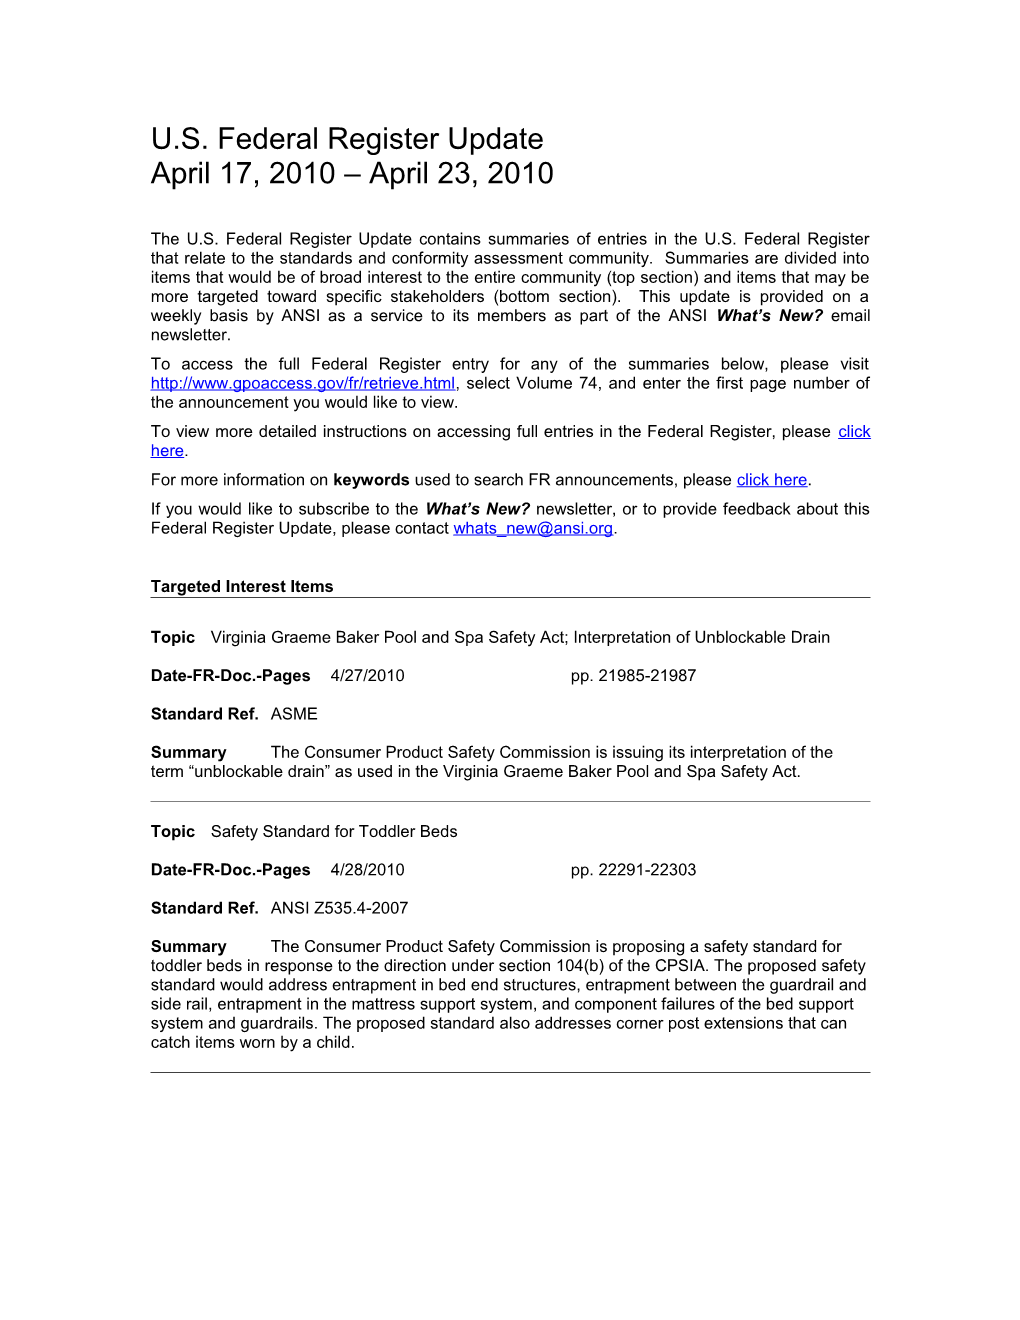 Standards and Trade Related Notices from the U.S. Federal Register, 04.30.2010